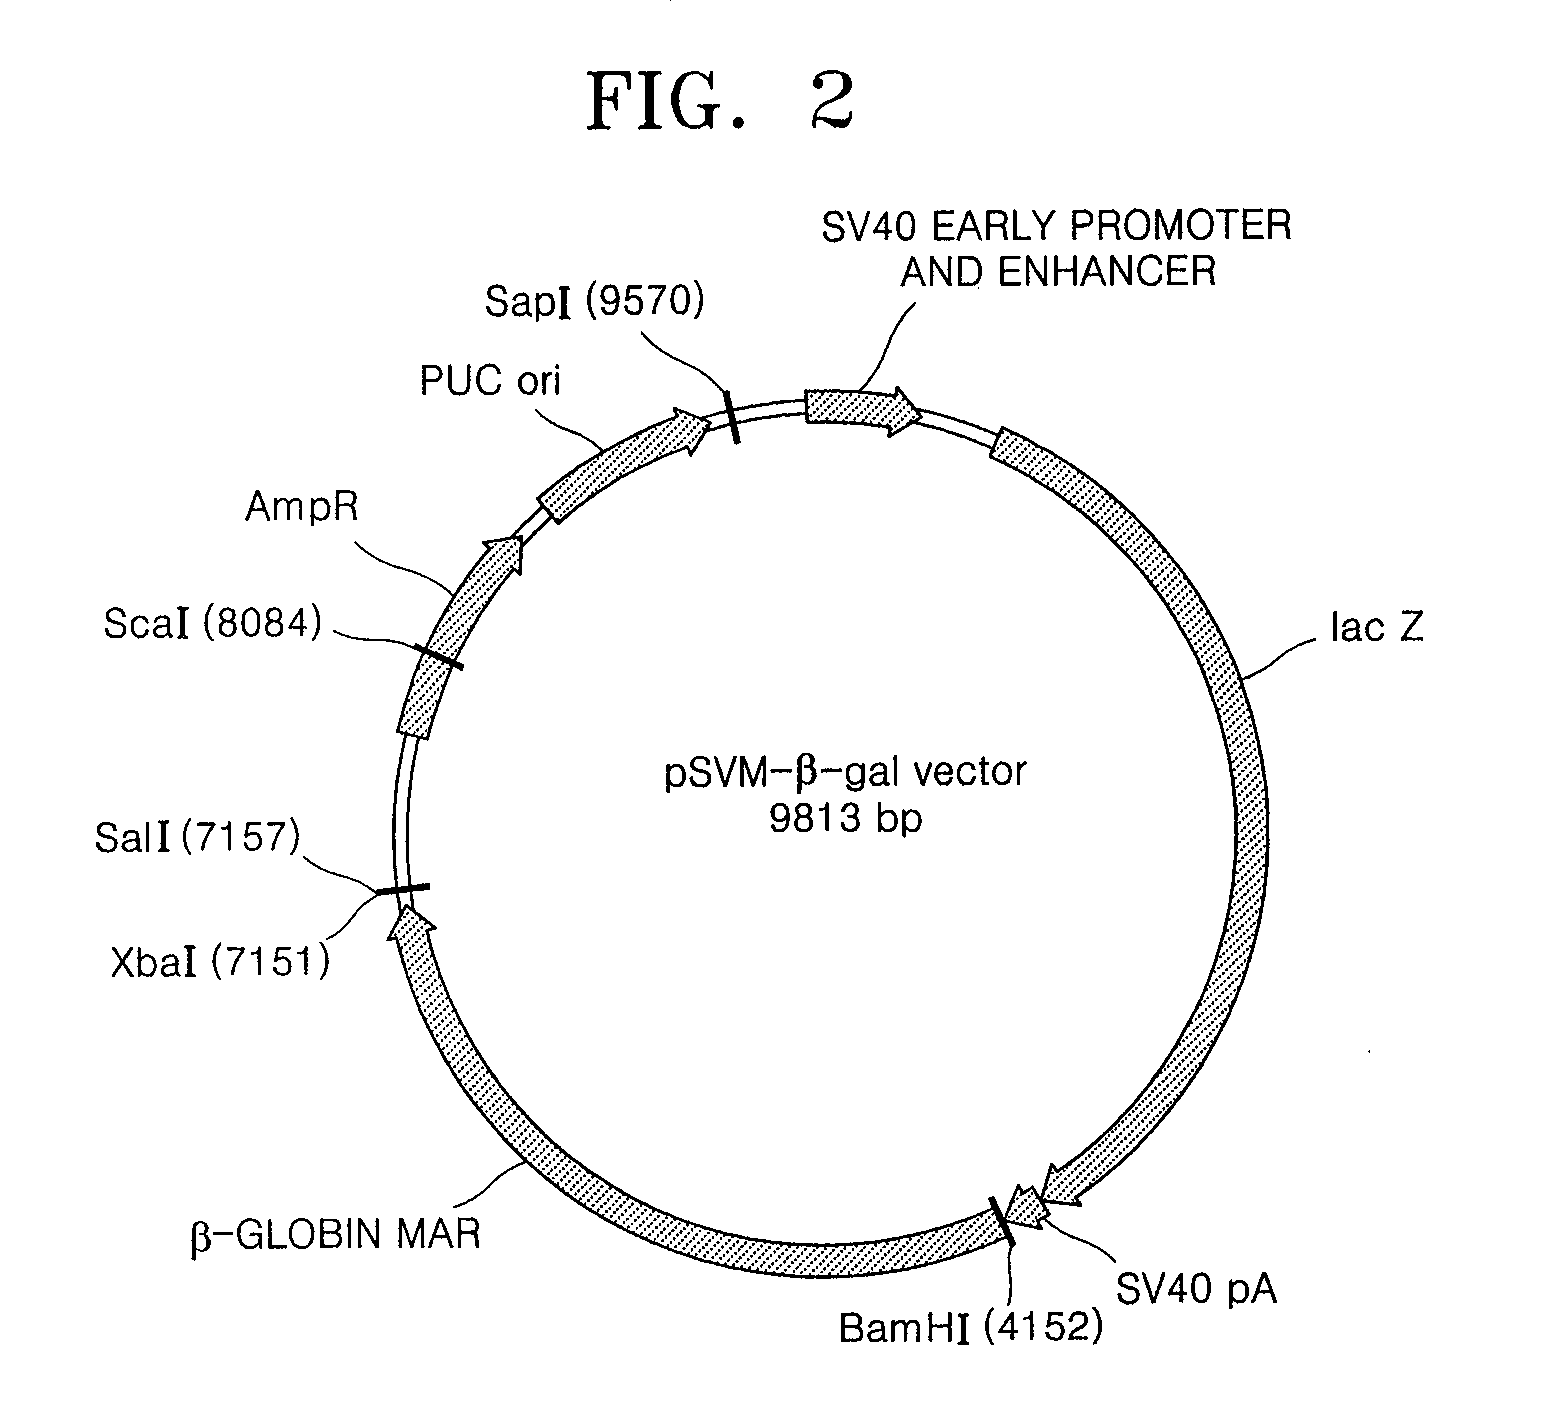 Expression Vector for Animal Cell Comprising at Least One Copy of Mar Dna Sequences at the 3'Terminal of Transcription Termination Region of a Gene and Method for the Expression of Foreign Gene Using the Vector